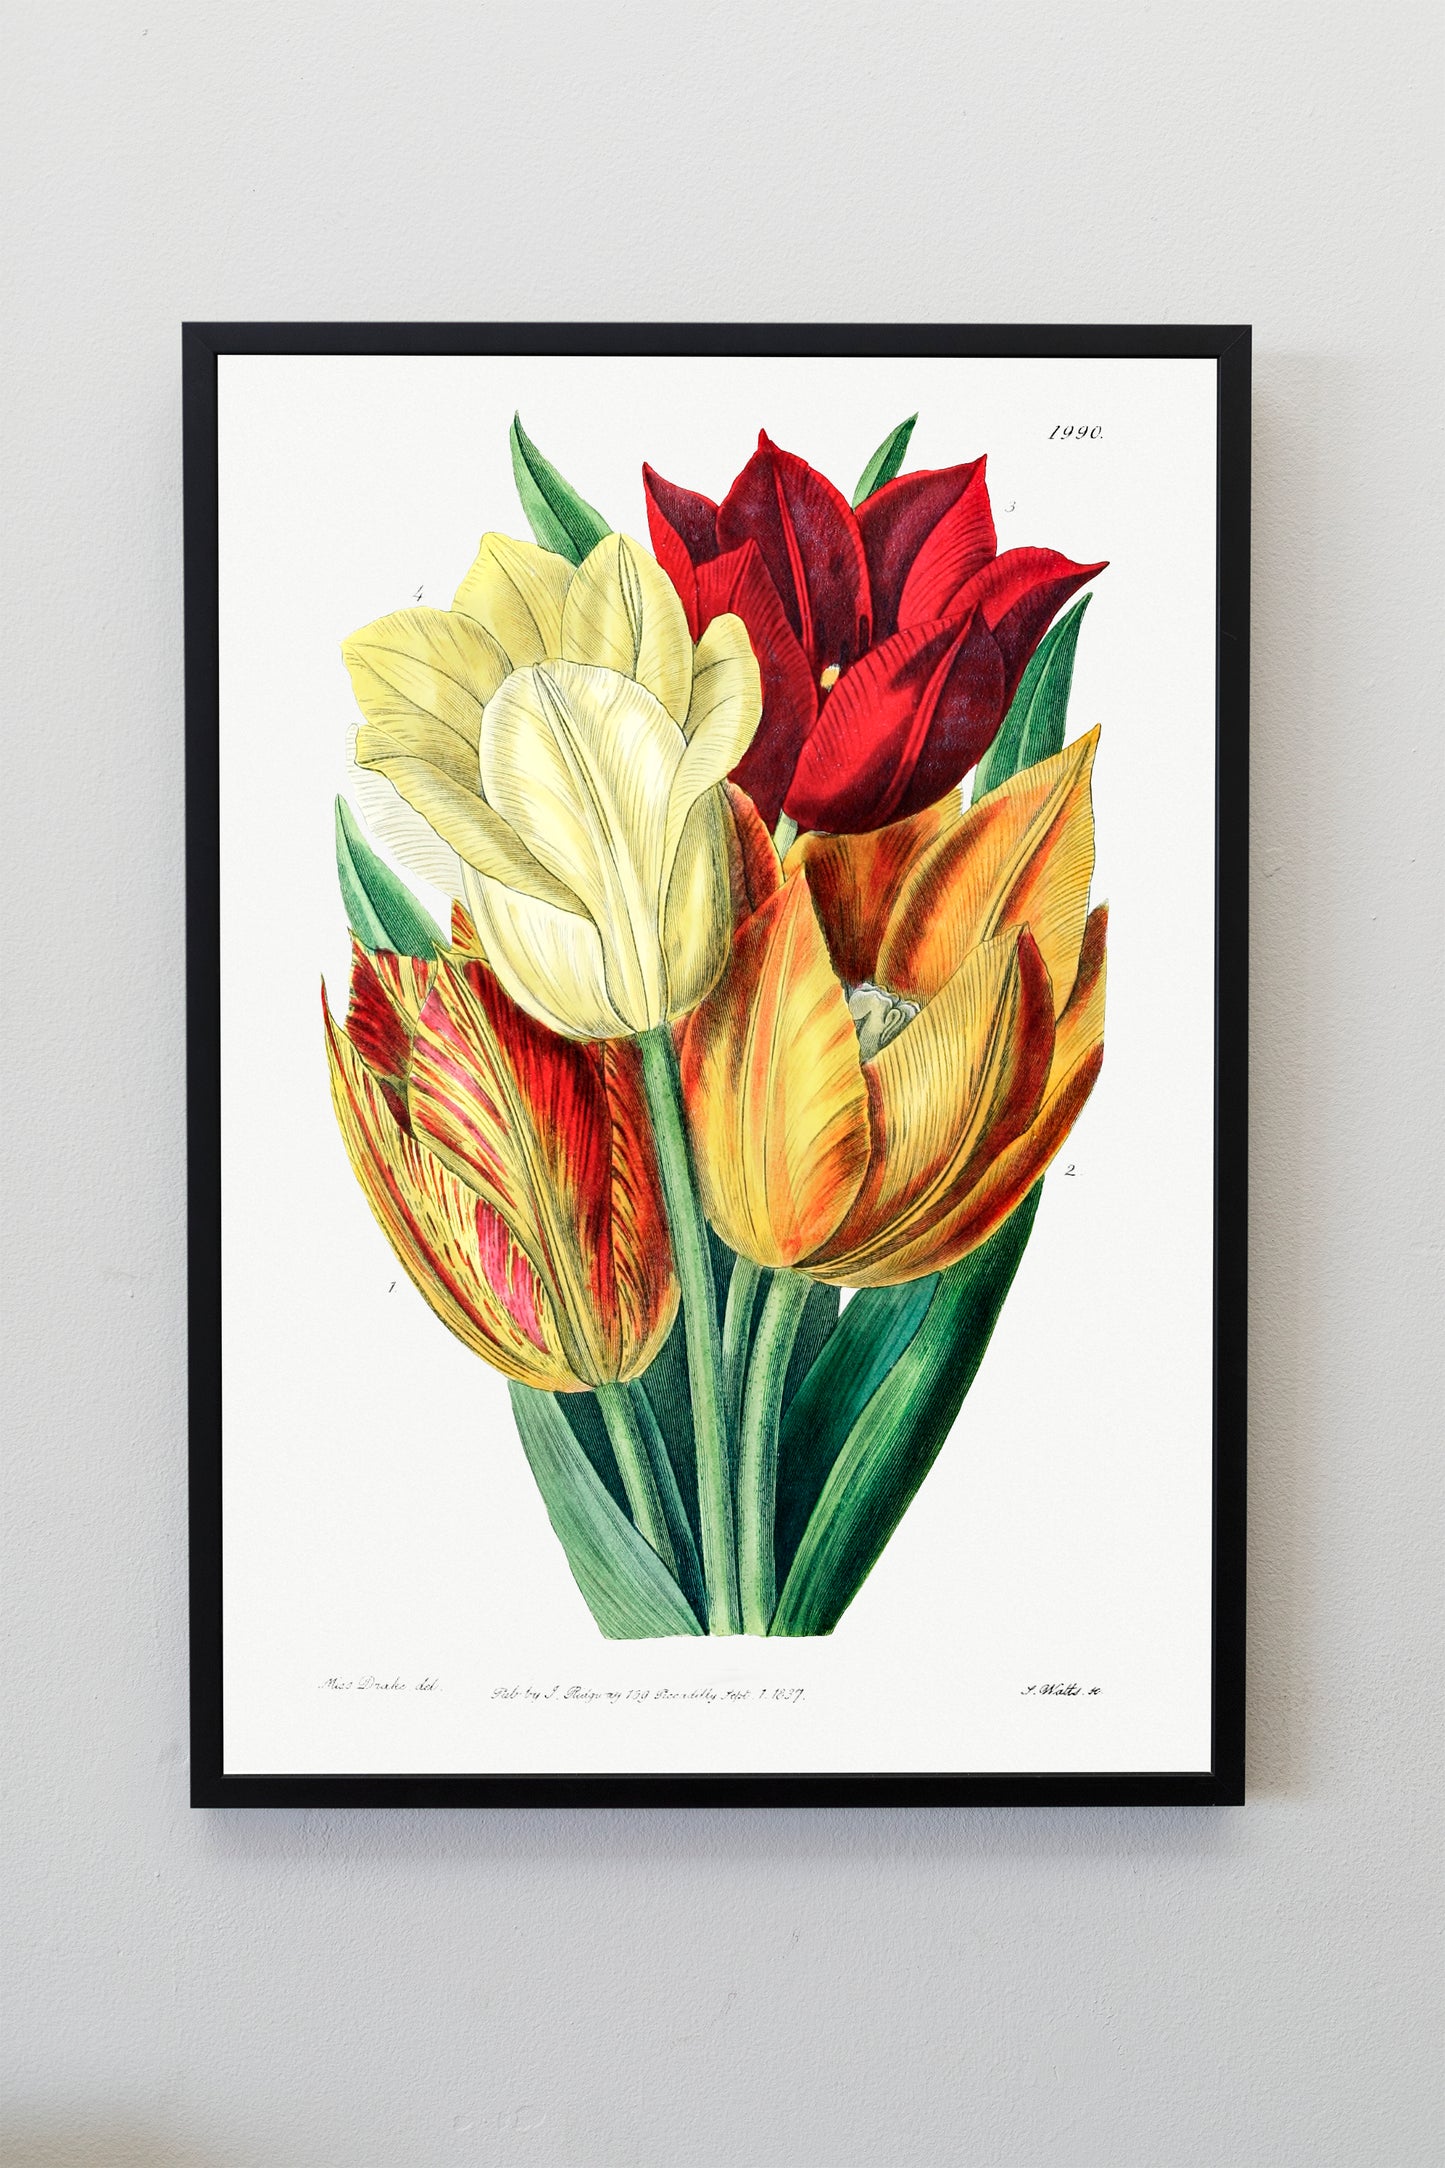 Rough stemmed tulip Illustration Poster Print Wall Hanging Decor A4 A3 A2